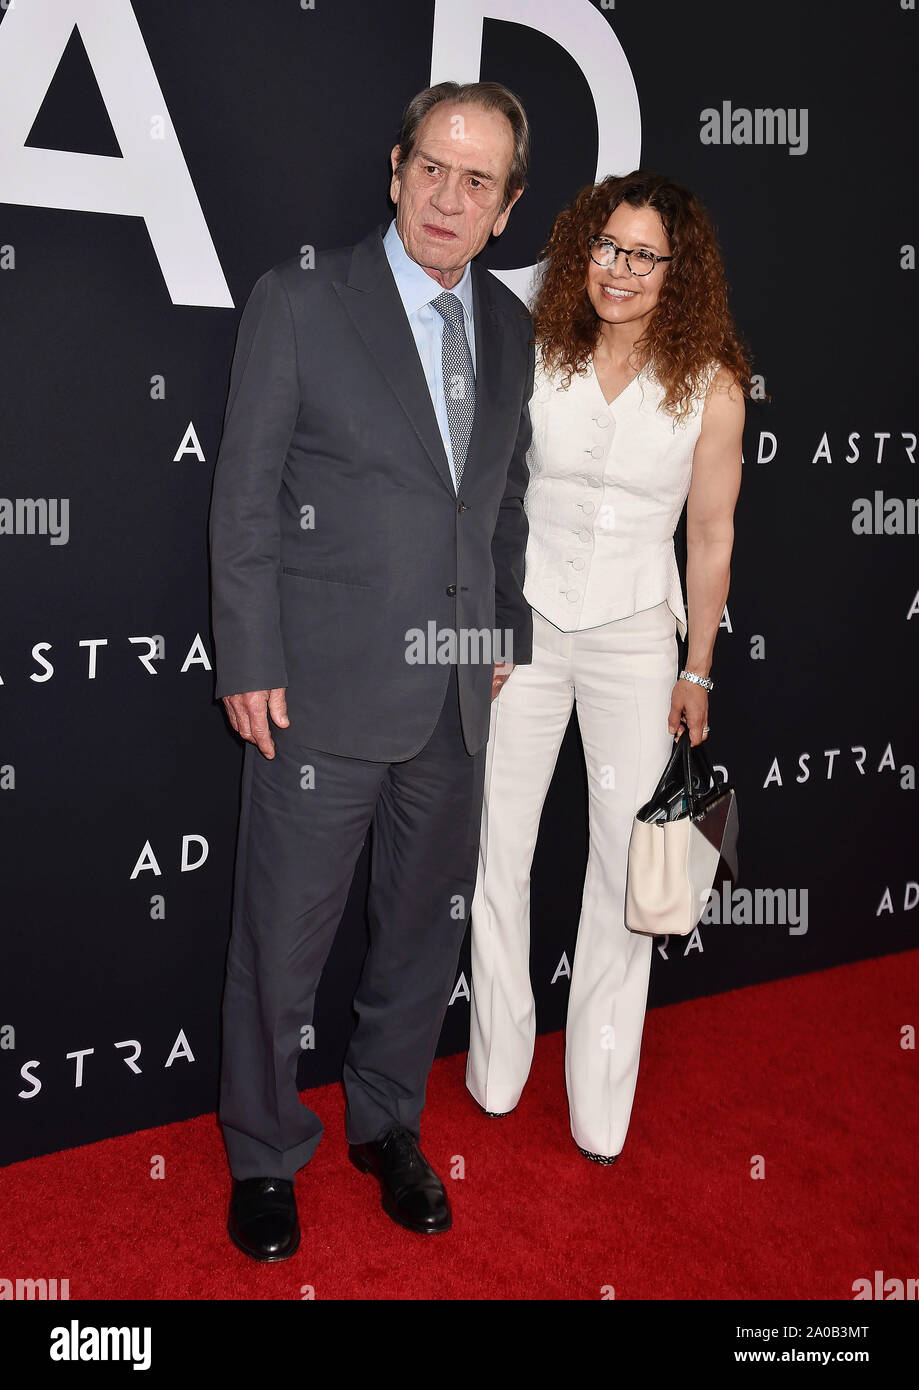 HOLLYWOOD, CA - SEPTEMBER 18: Tommy Lee Jones and Dawn Laurel-Jones attend the premiere of 20th Century Fox's 'Ad Astra' at The Cinerama Dome on September 18, 2019 in Los Angeles, California. Stock Photo